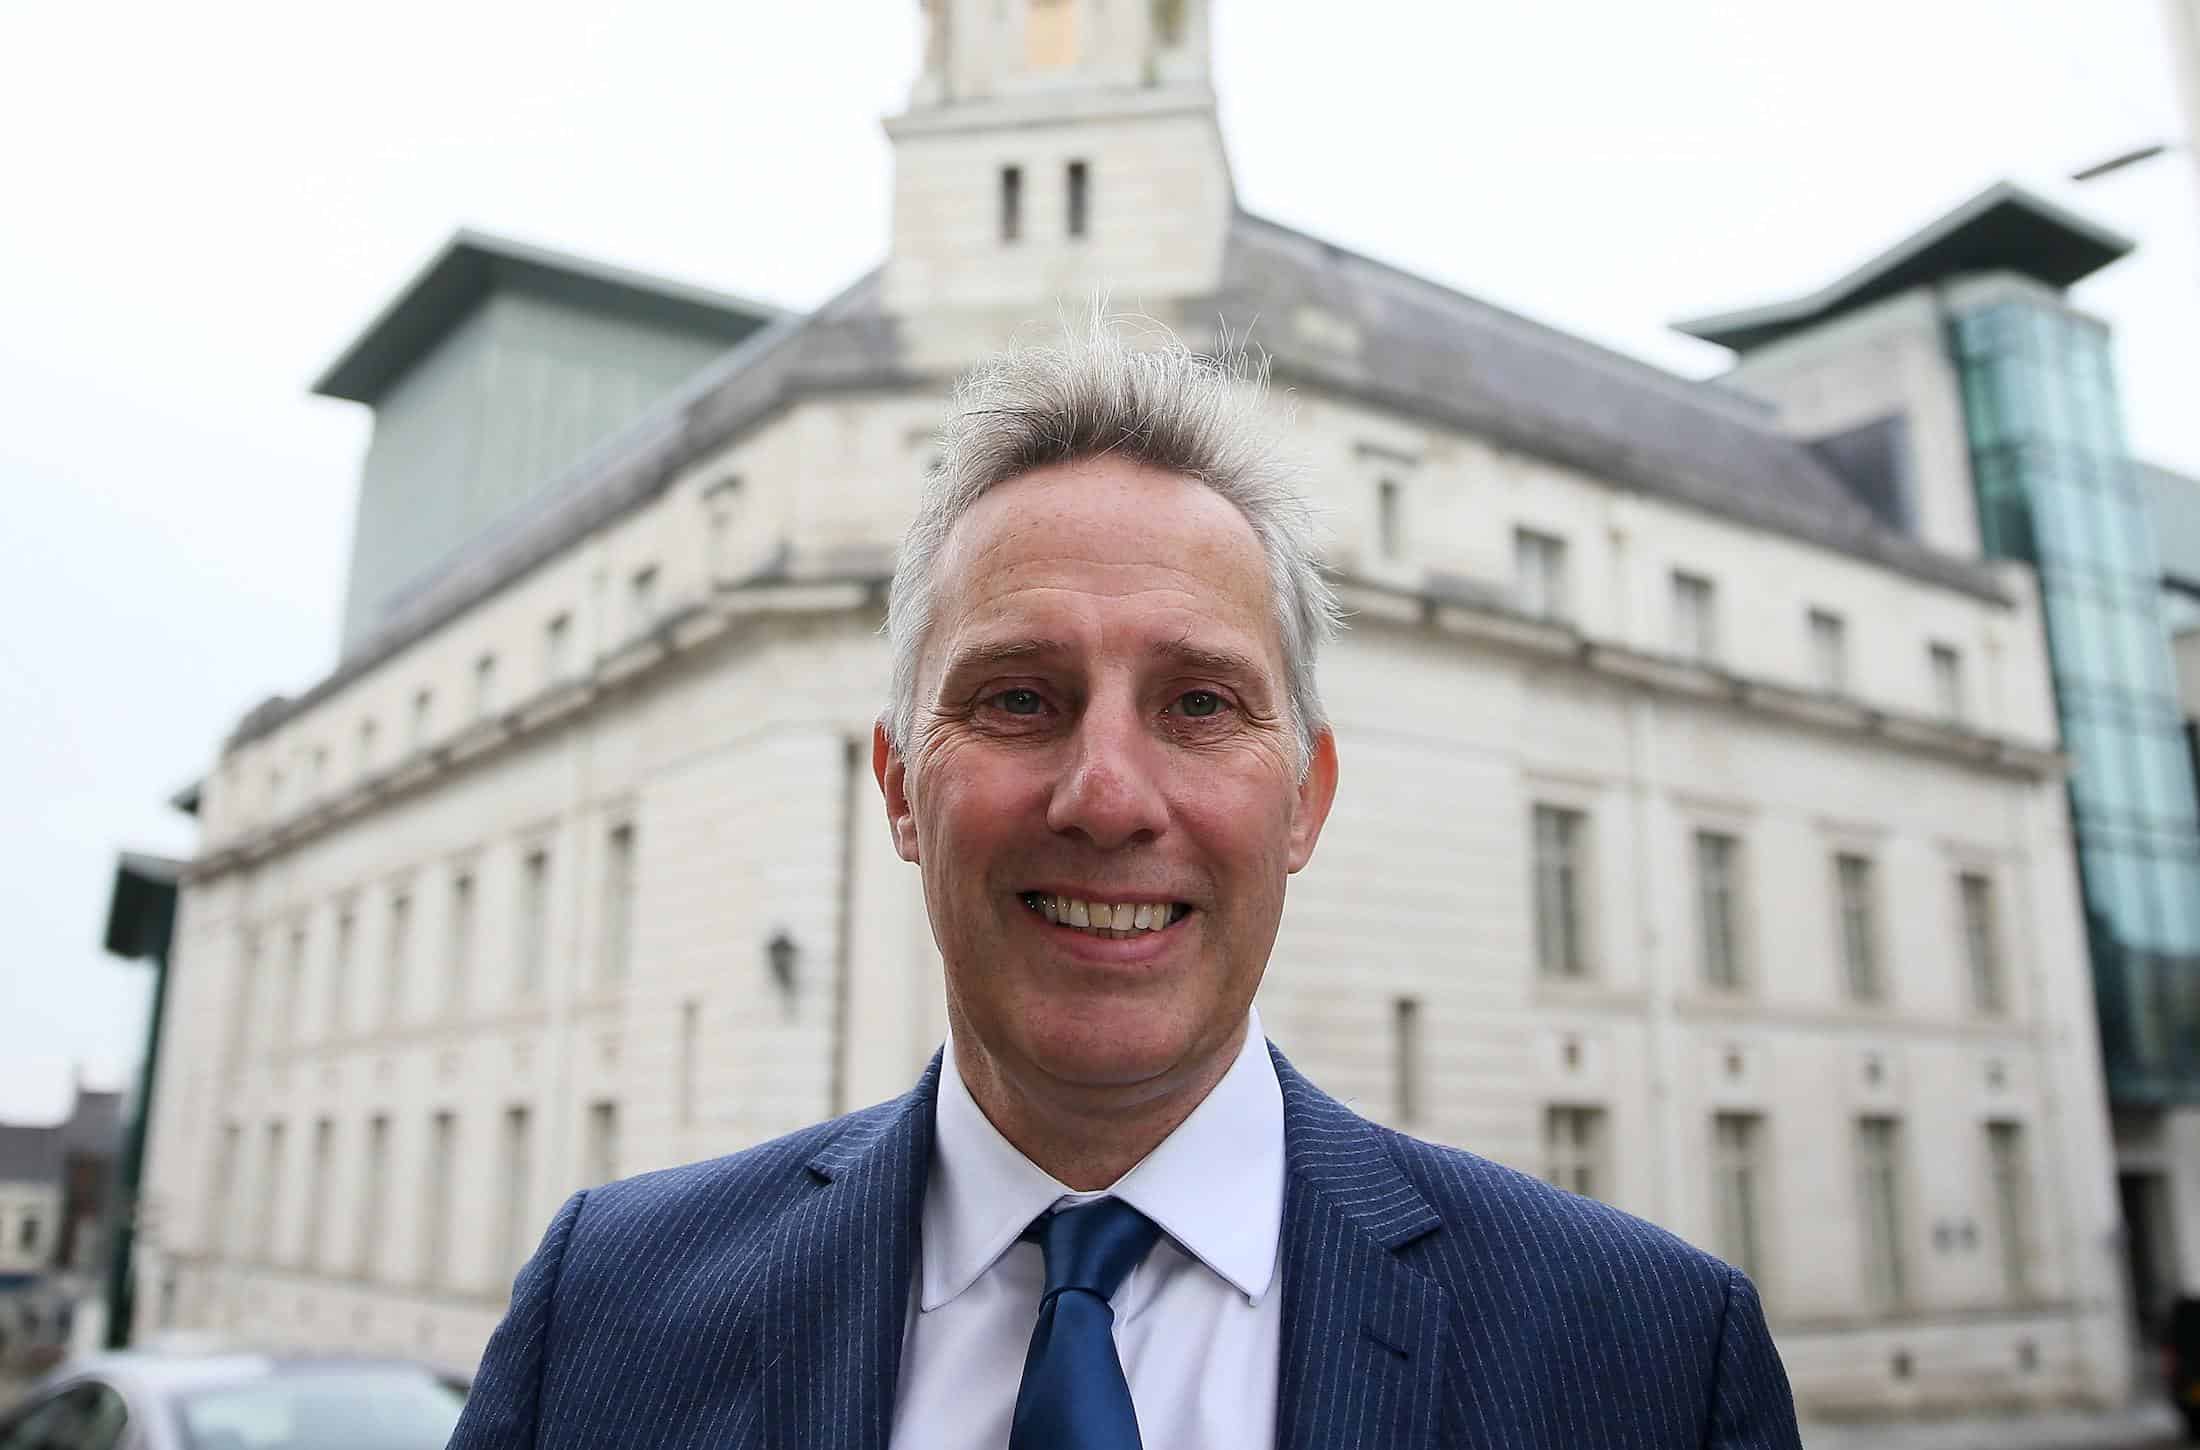 MP Ian Paisley apologises after failing to register luxury holiday and it’s not the first time